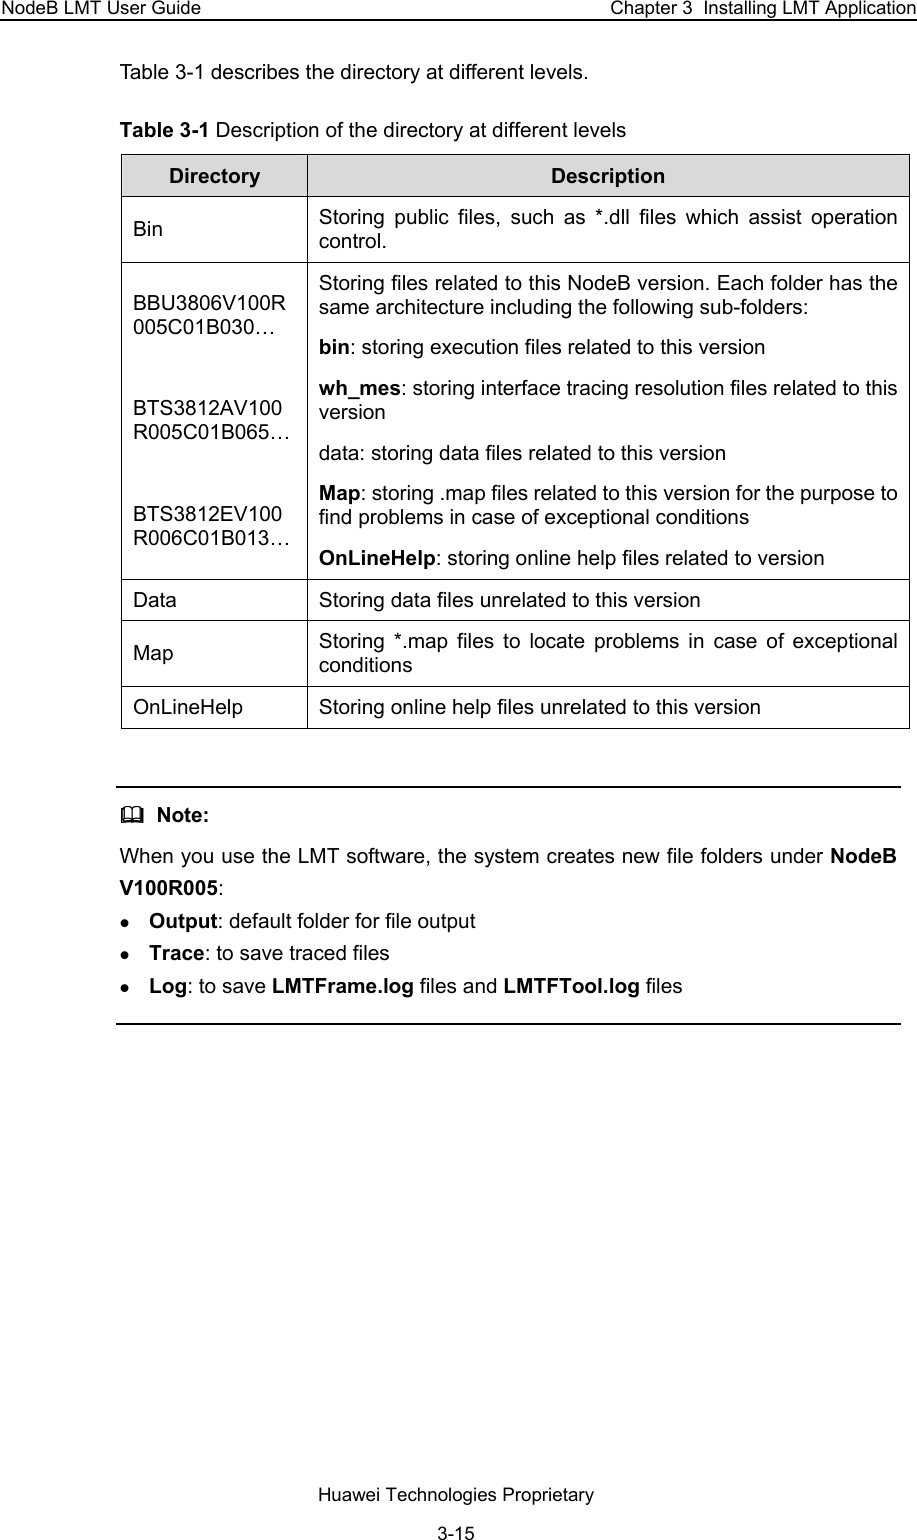 NodeB LMT User Guide  Chapter 3  Installing LMT Application Table 3-1 describes the directory at different levels.  Table 3-1 Description of the directory at different levels Directory   Description  Bin  Storing public files, such as *.dll files which assist operation control. BBU3806V100R005C01B030…  BTS3812AV100R005C01B065…  BTS3812EV100R006C01B013… Storing files related to this NodeB version. Each folder has the same architecture including the following sub-folders:  bin: storing execution files related to this version  wh_mes: storing interface tracing resolution files related to this version data: storing data files related to this version Map: storing .map files related to this version for the purpose to find problems in case of exceptional conditions  OnLineHelp: storing online help files related to version  Data  Storing data files unrelated to this version Map  Storing *.map files to locate problems in case of exceptional conditions  OnLineHelp  Storing online help files unrelated to this version    Note:  When you use the LMT software, the system creates new file folders under NodeB V100R005:  z Output: default folder for file output  z Trace: to save traced files z Log: to save LMTFrame.log files and LMTFTool.log files  Huawei Technologies Proprietary 3-15 